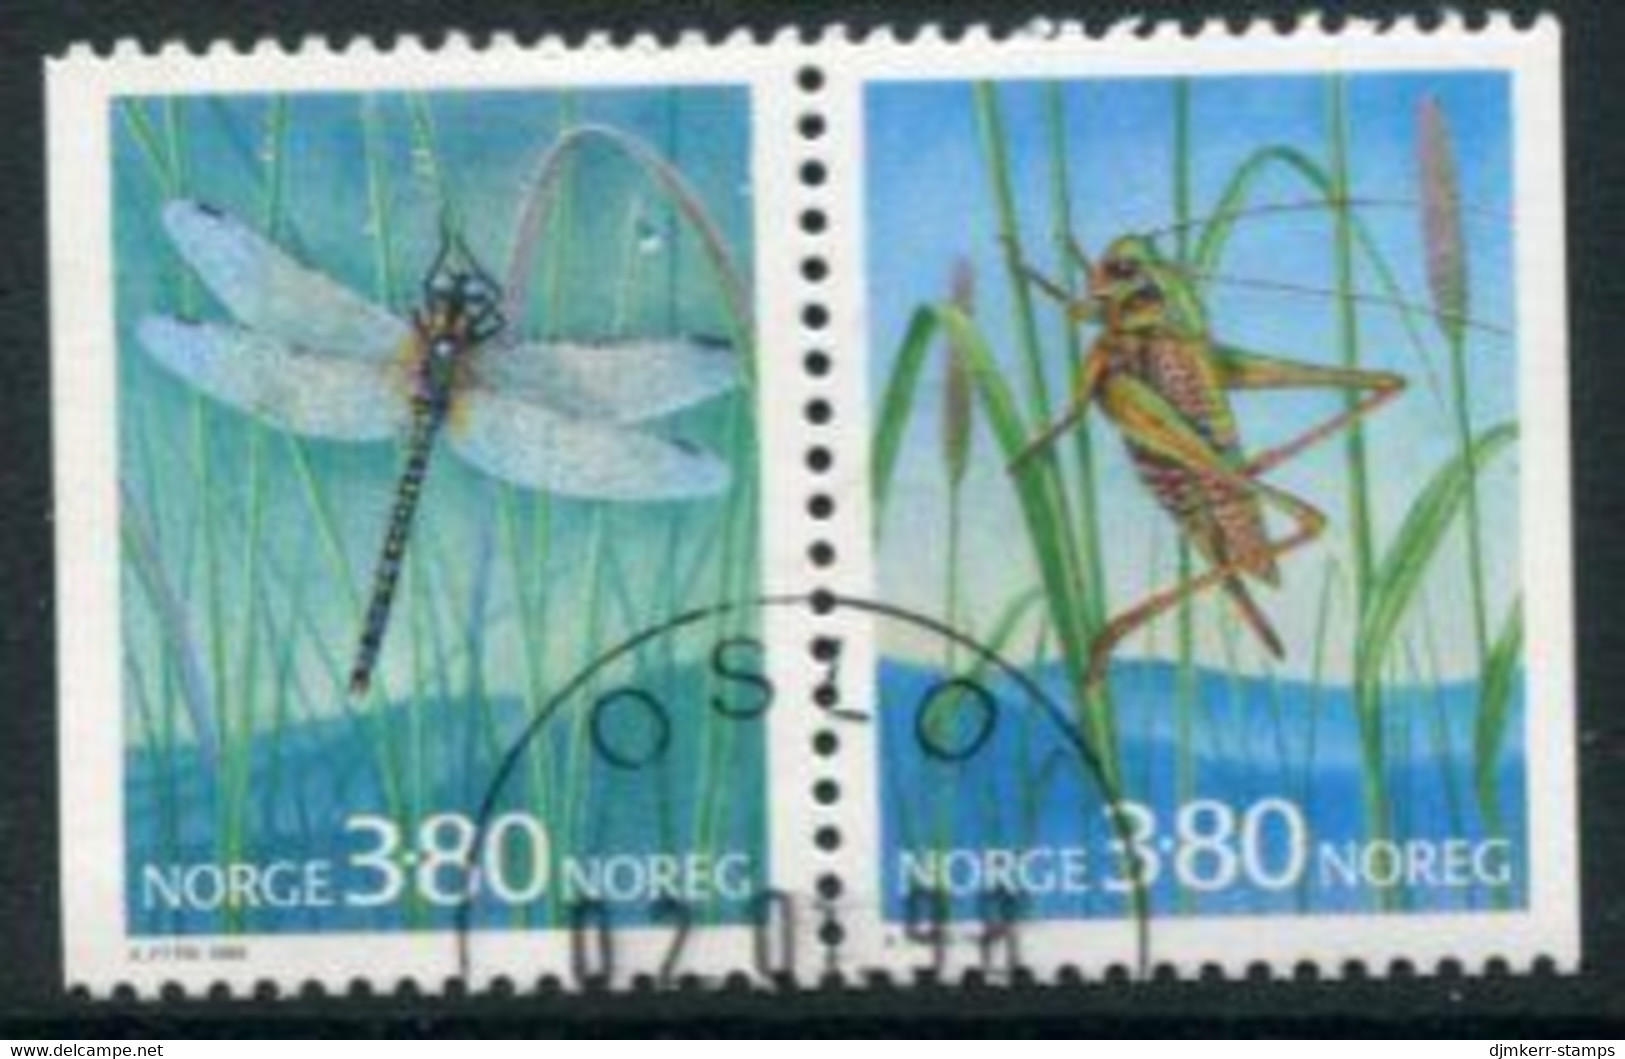 NORWAY 1998 Insects Pair Used.   Michel 1275-76 - Usados